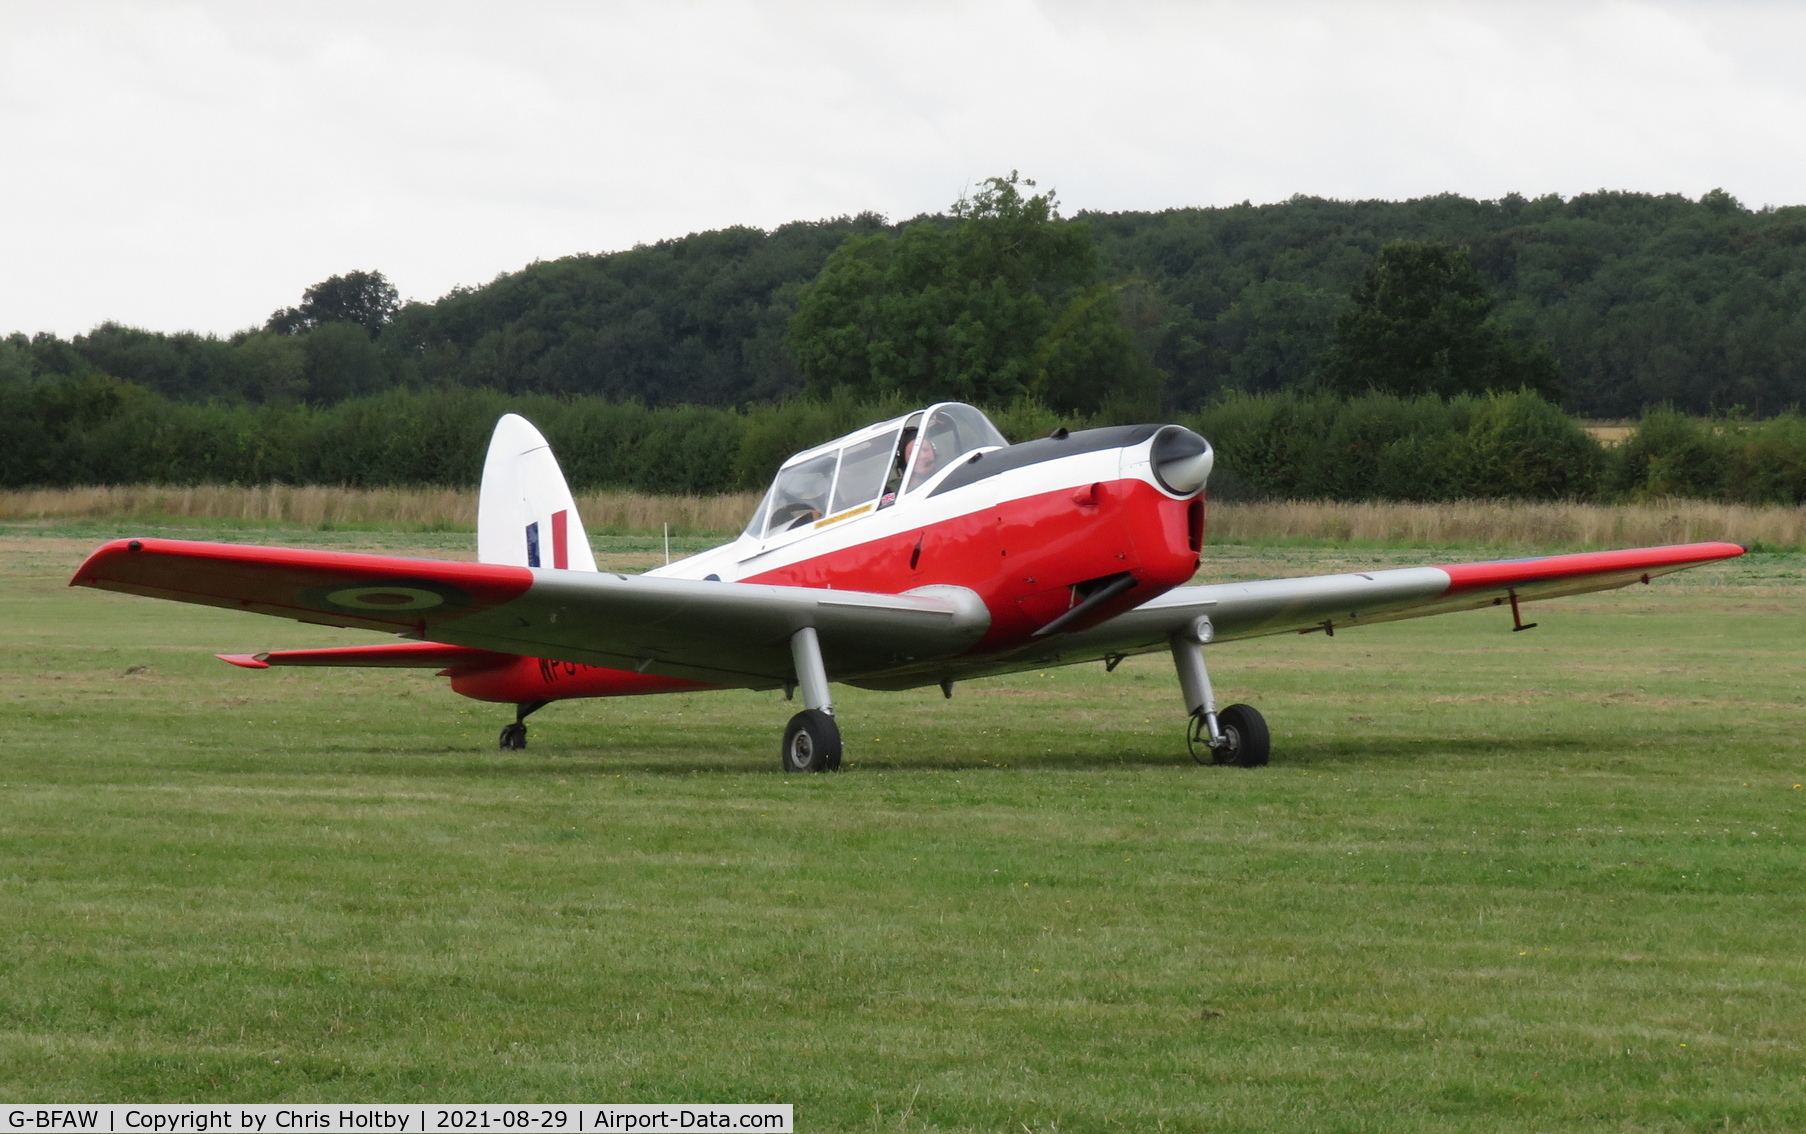 G-BFAW, 1952 De Havilland DHC-1 Chipmunk T.10 C/N C1/0733, Arriving at Little Gransden Airshow 2021 to take part as one of the Red Sparrows display team